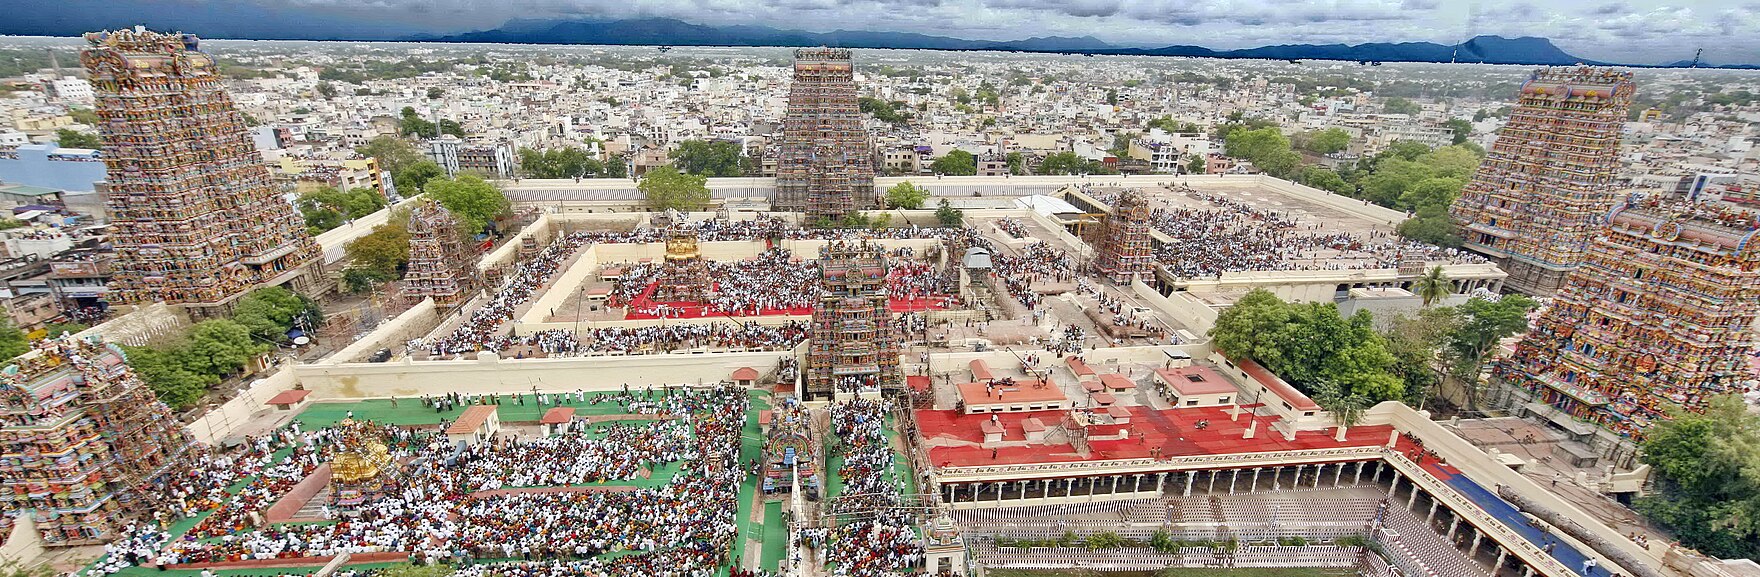 An aerial view of the Meenakshi Temple from the top of the southern gopuram, looking north. The temple was rebuilt by the Vijayanagara Empire.